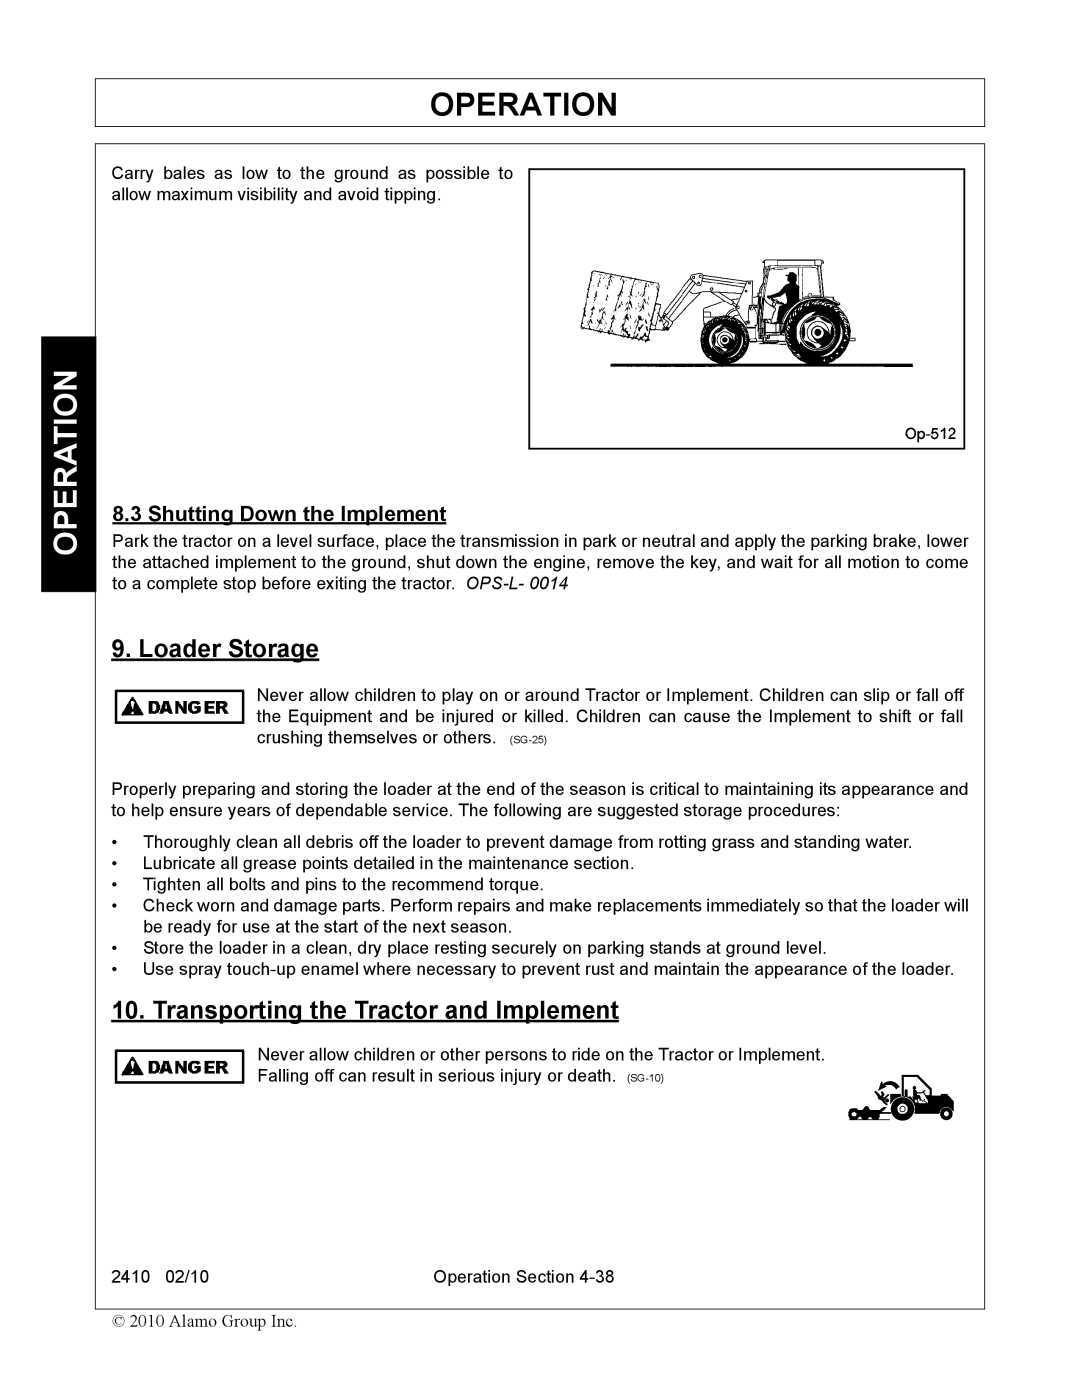 Servis-Rhino 2410 manual Loader Storage, Transporting the Tractor and Implement, Shutting Down the Implement 